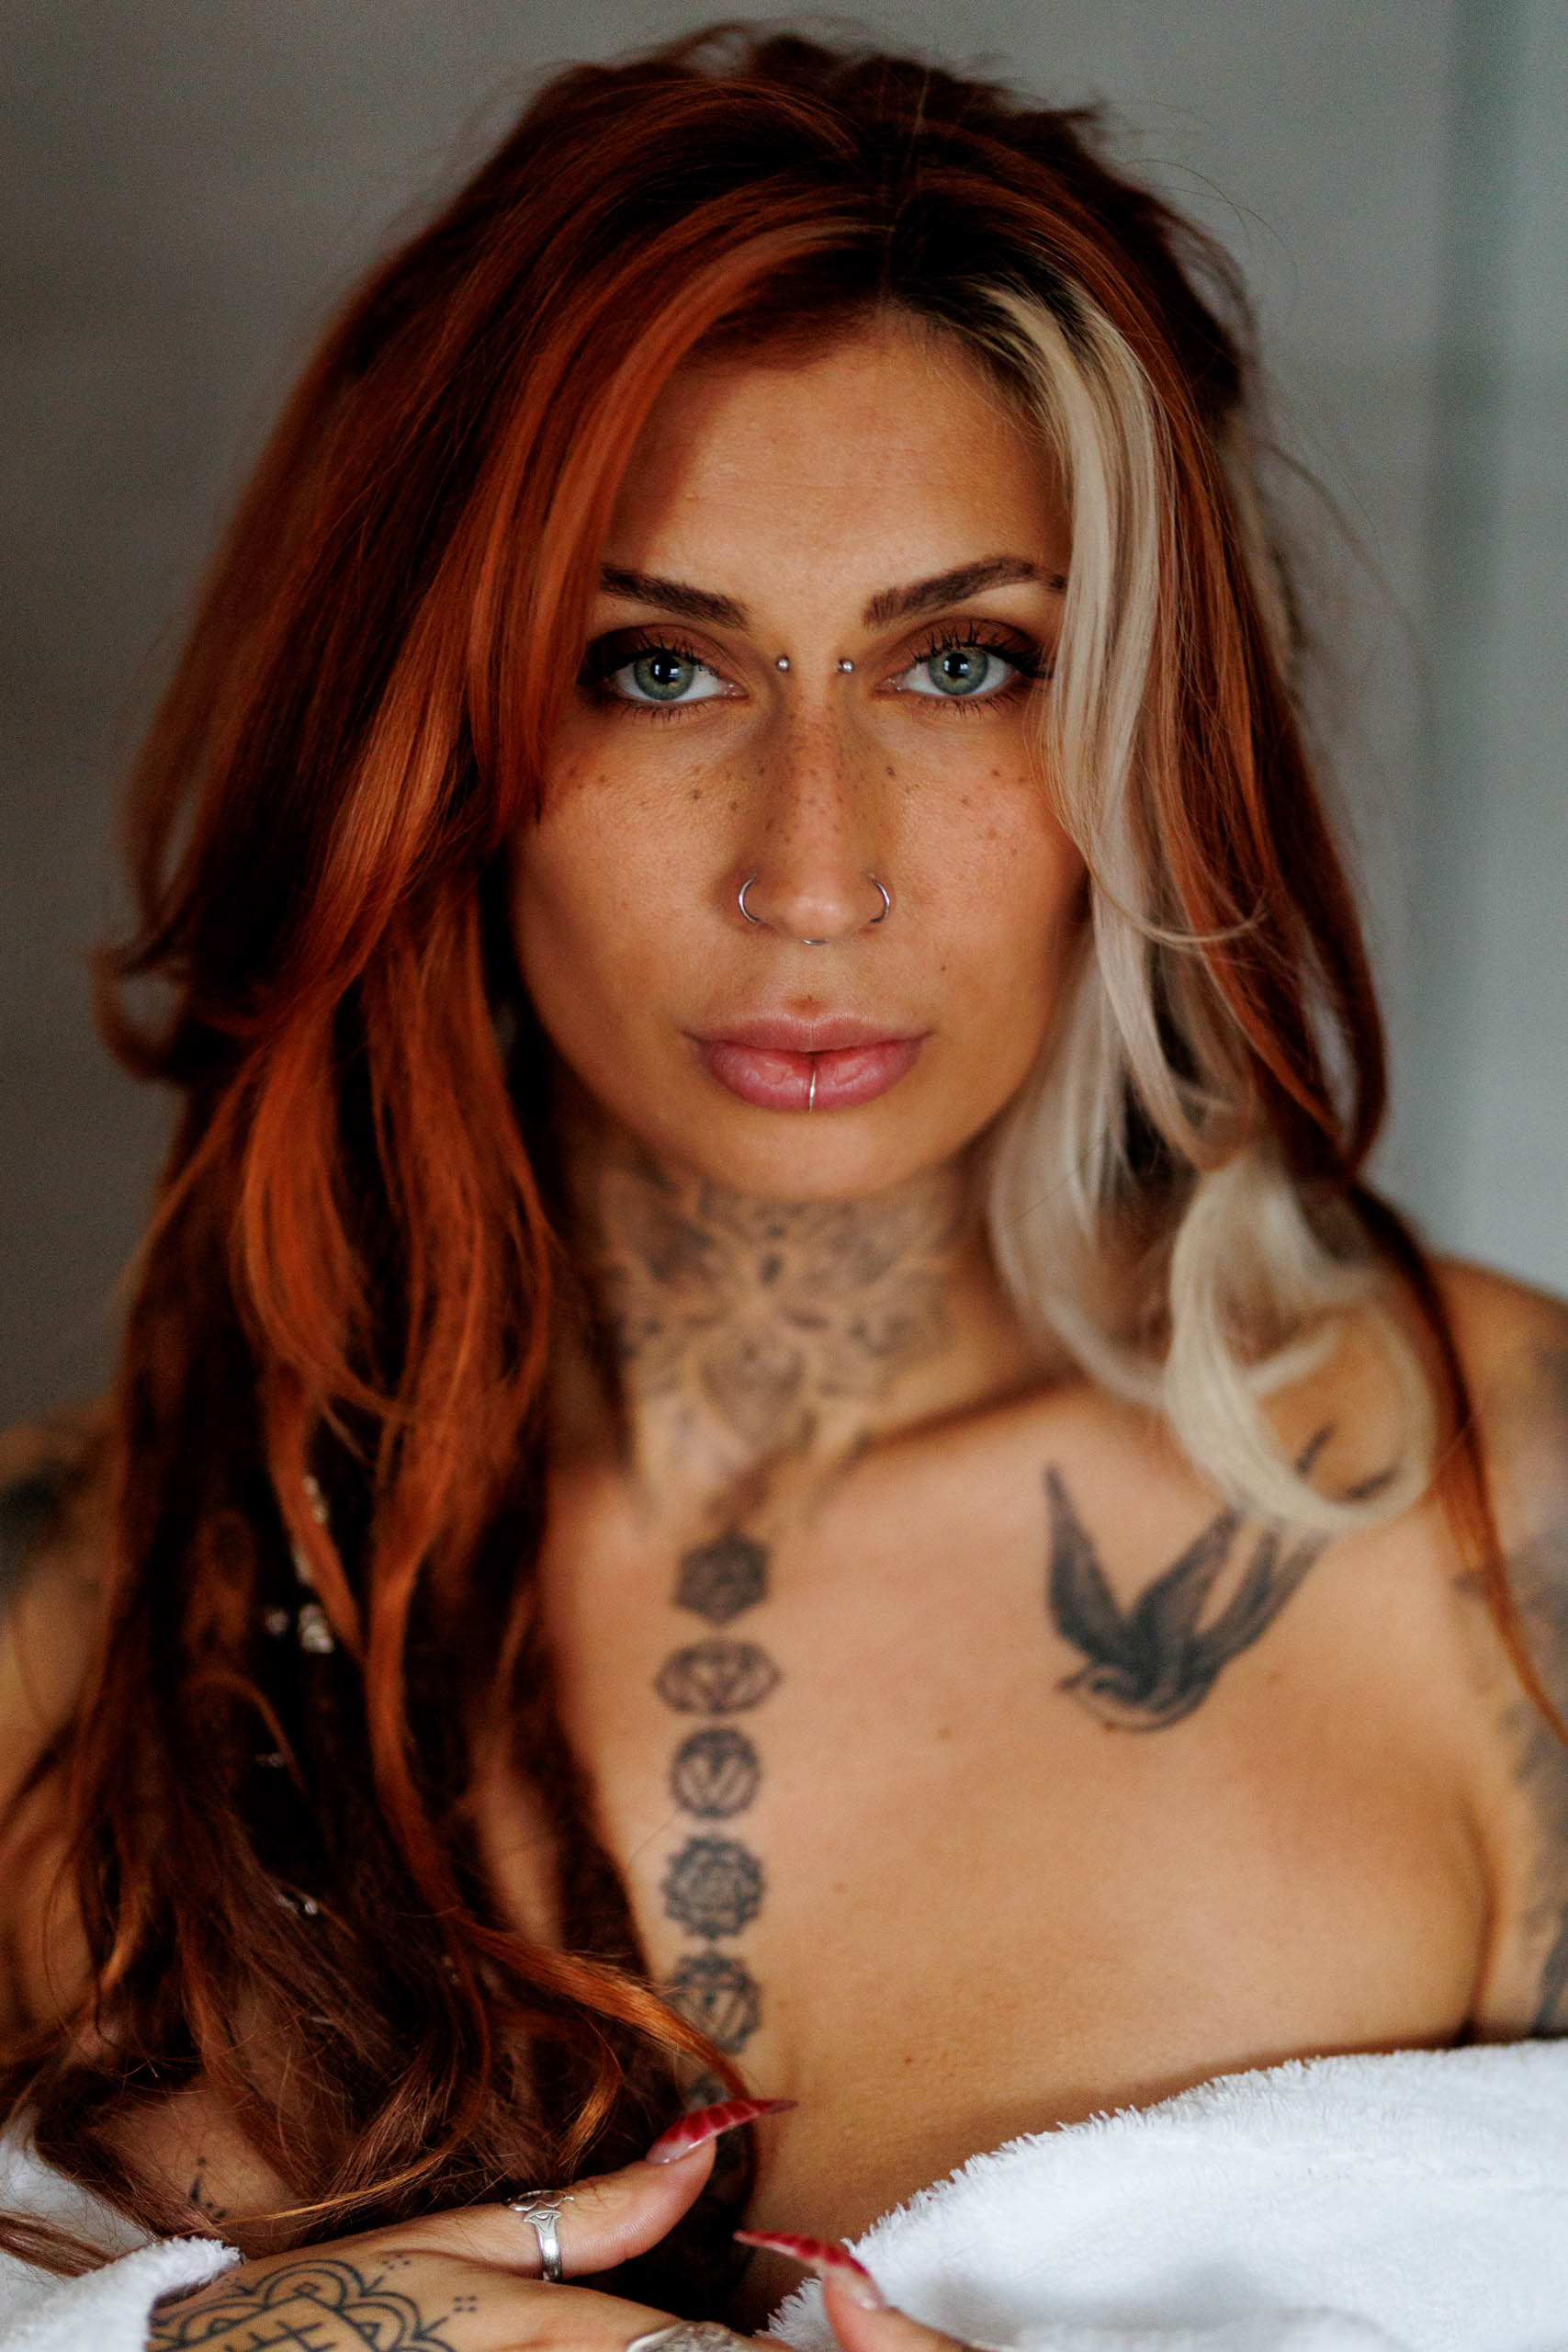 A woman with red hair and tattoos poses in a towel for a glamour photo shoot.